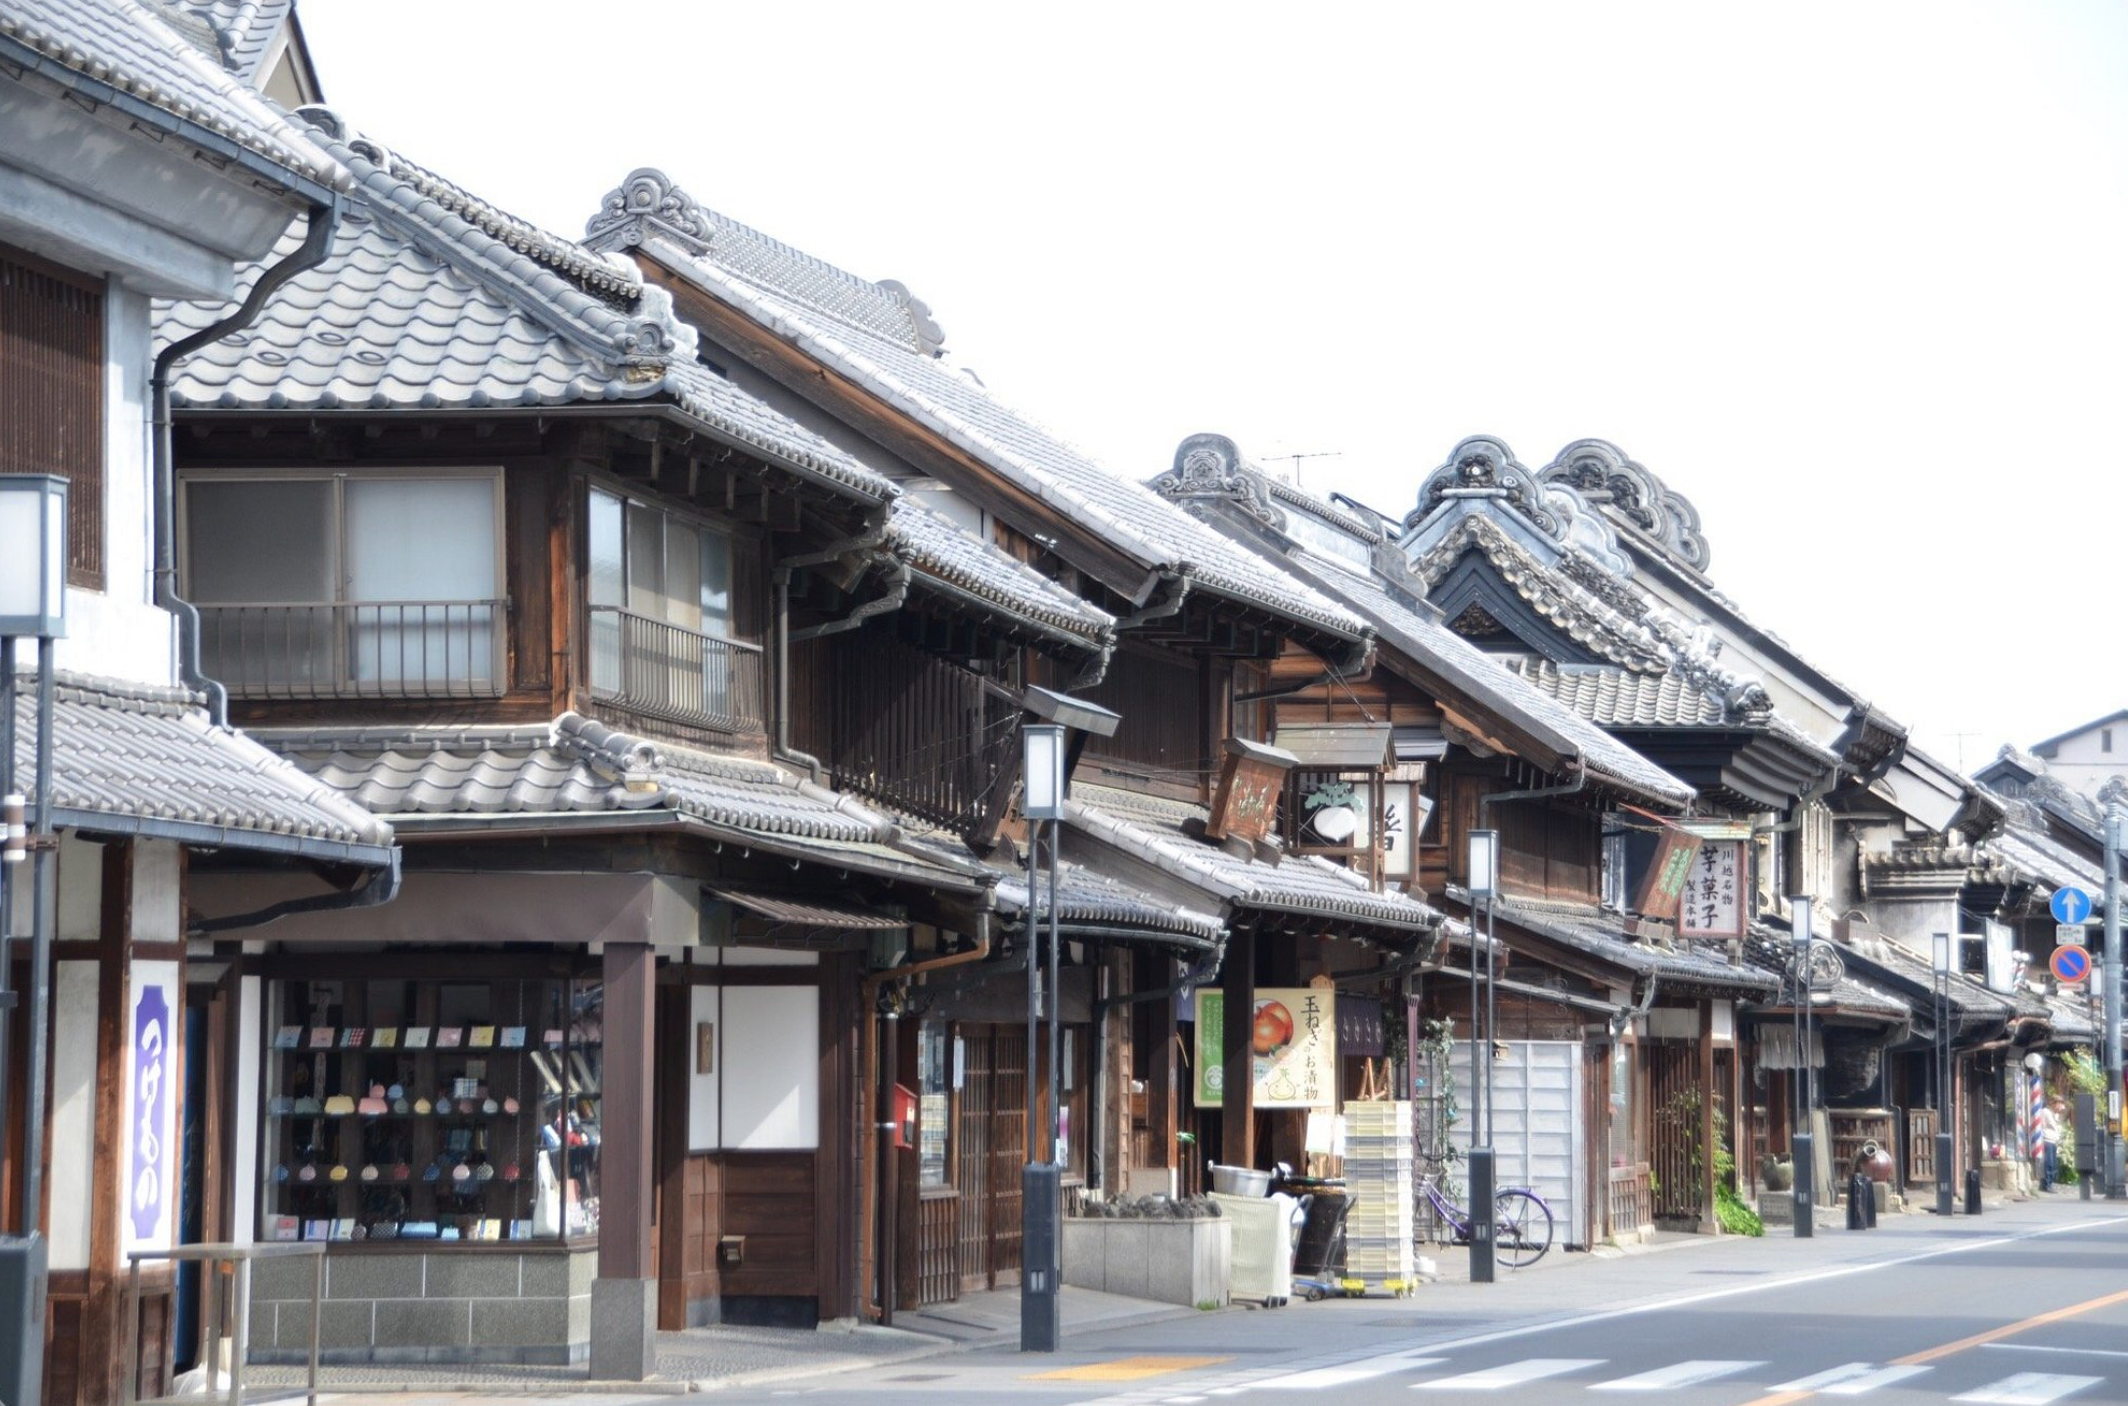 kawagoe day trip from tokyo : An Awesome Day Trip From Tokyo